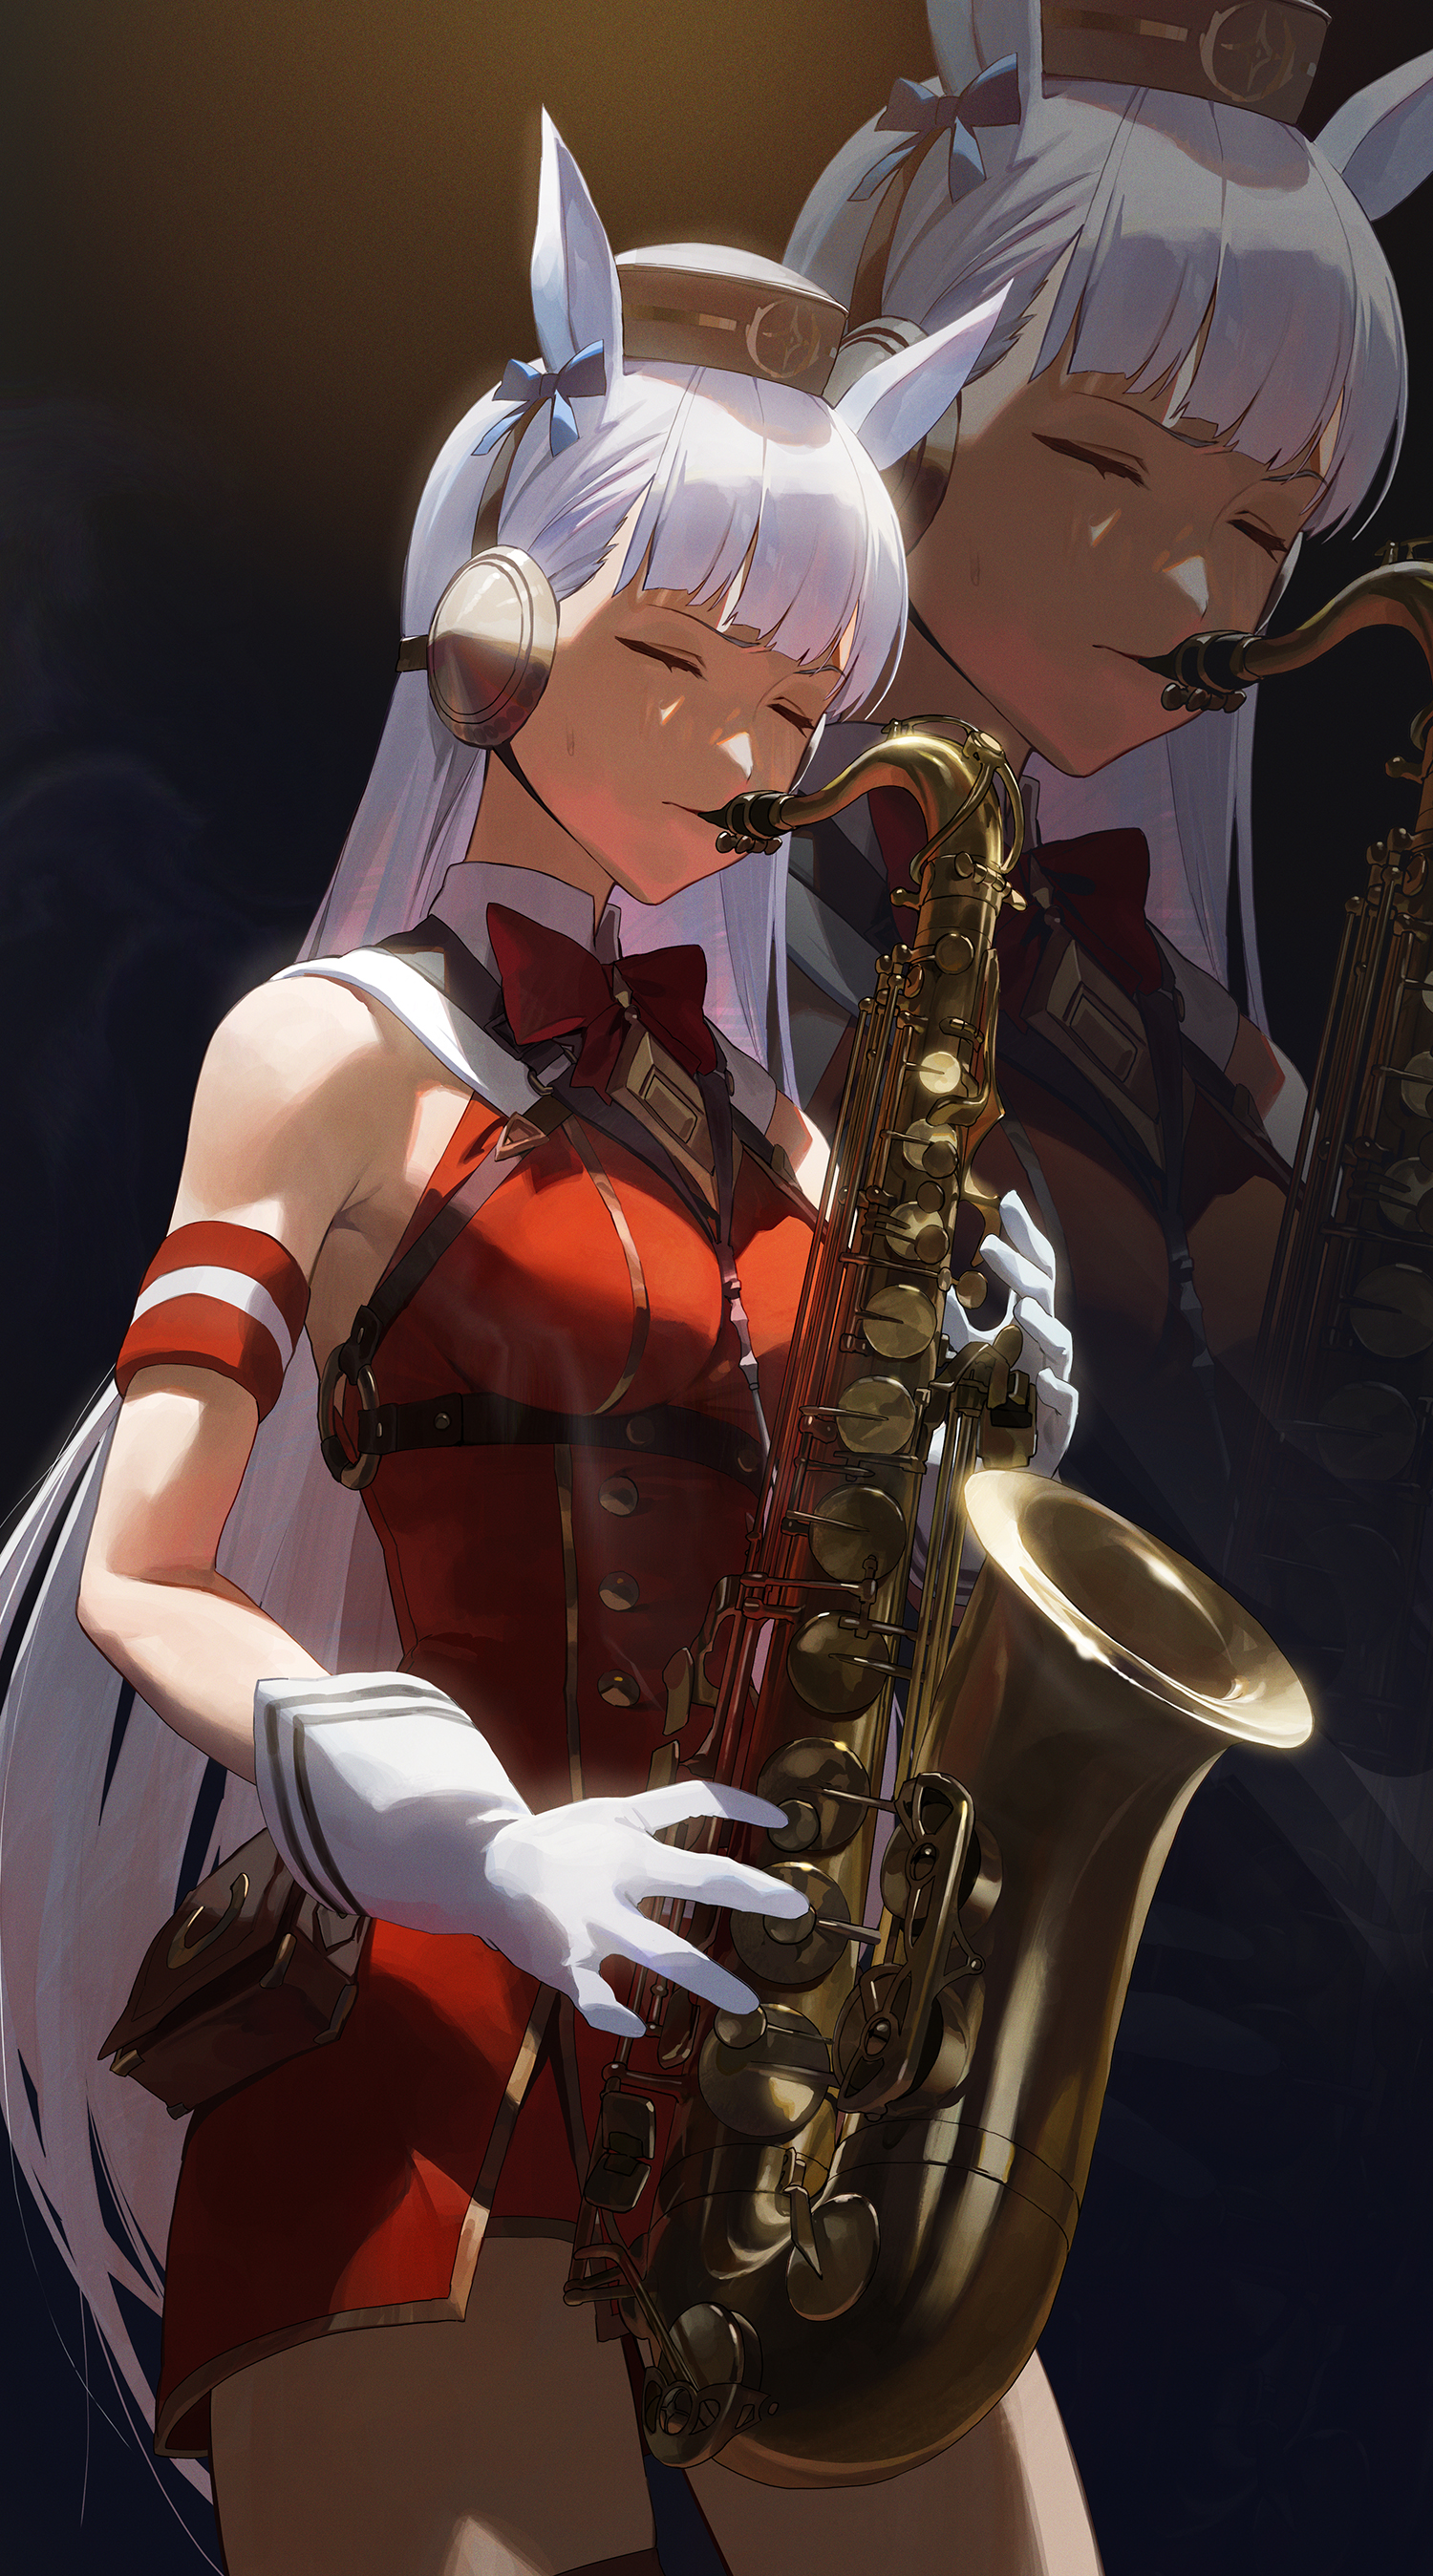 amanda.szee playing anime songs on the saxophone. Rate 1 to 10 |  @amanda.szee playing anime songs on the saxophone. Rate 1 to 10 #music # saxophone #musician #saxophonist #anime | By Music Traveler | Facebook